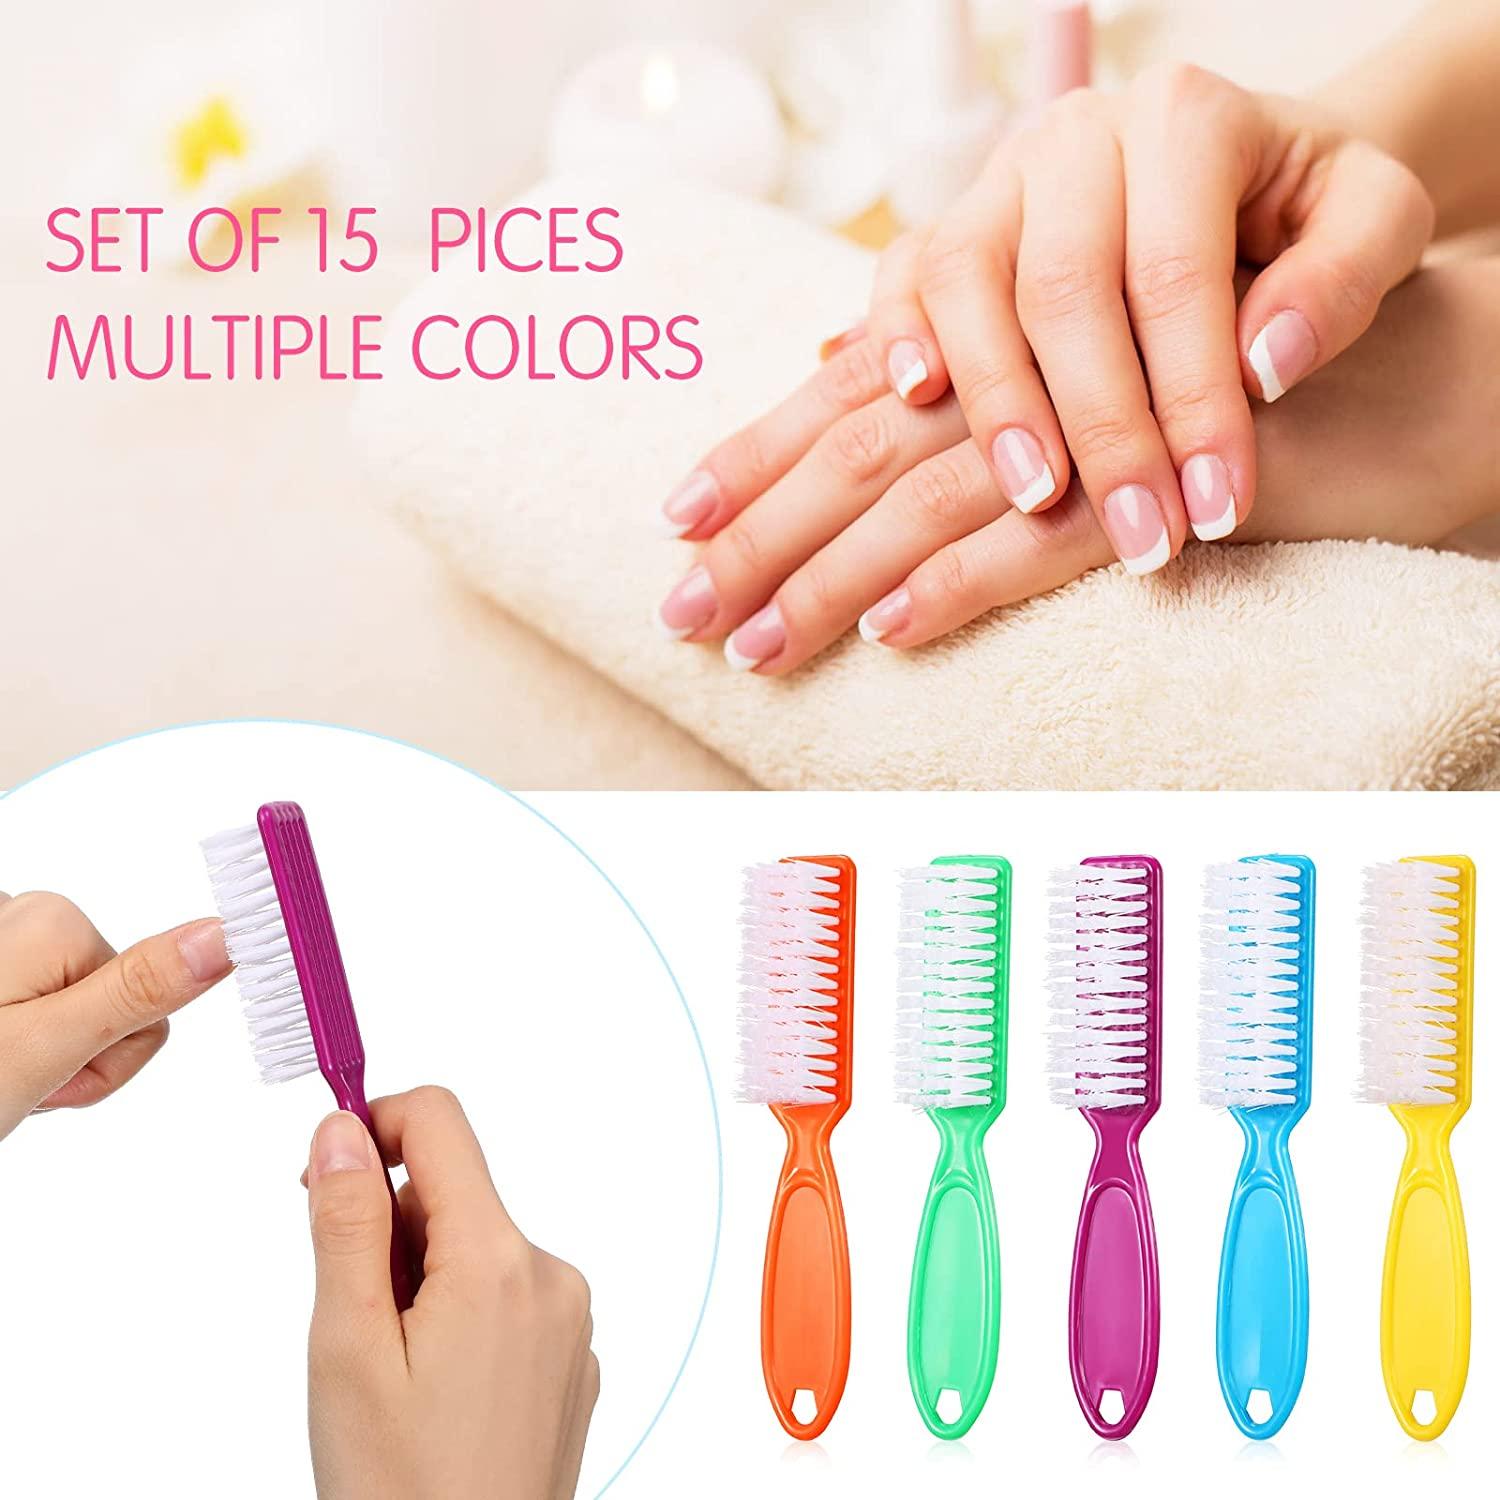 Handle Grip Nail Brush Cleaning Brushes For Toes And Nails